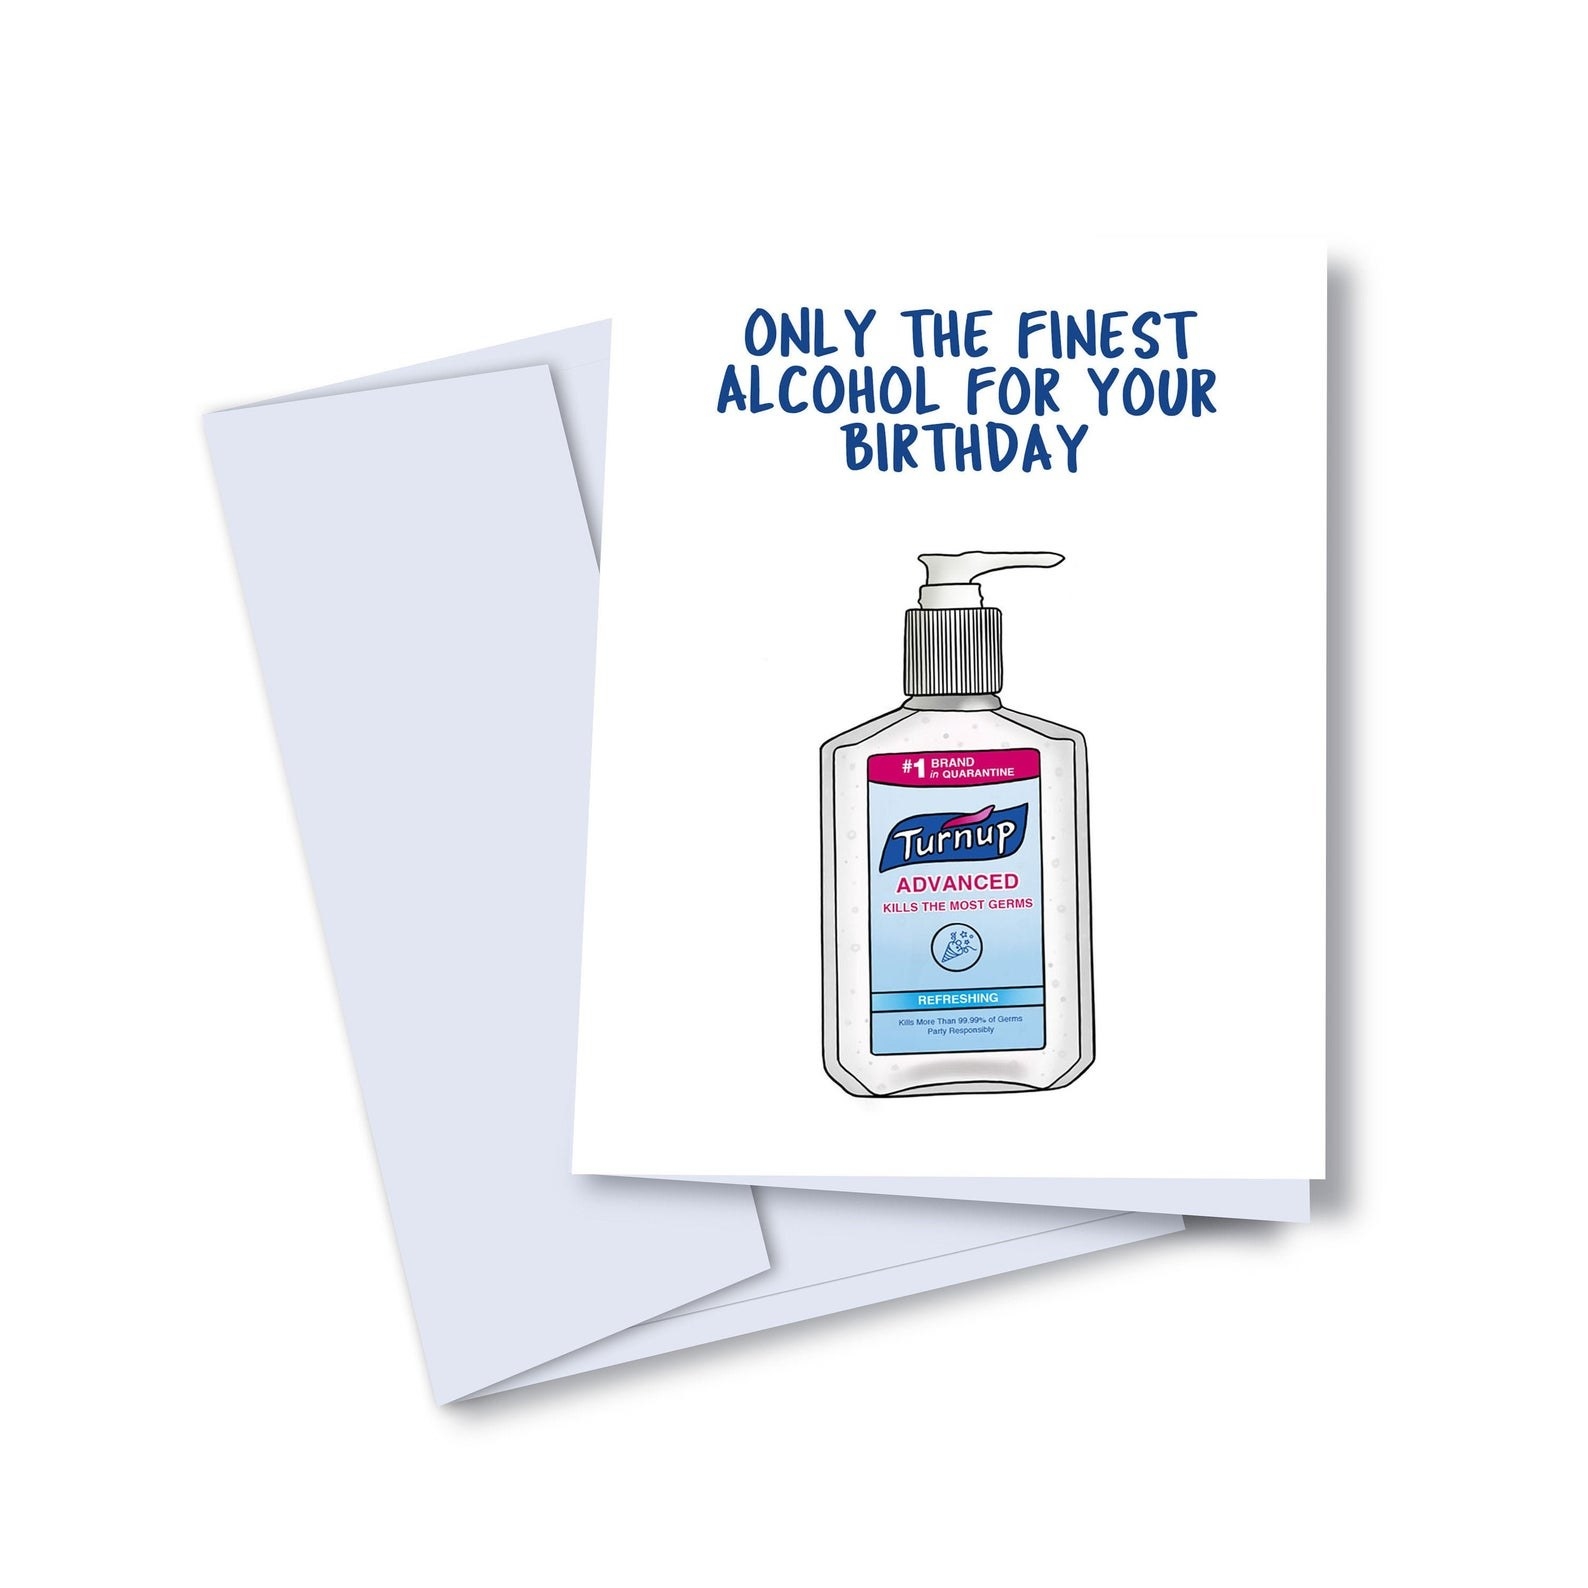 A card that says &quot;Only the finest alcohol for your birthday&quot; with a bottle of hand sanitizer from a made up brand called &quot;Turnup&quot; 